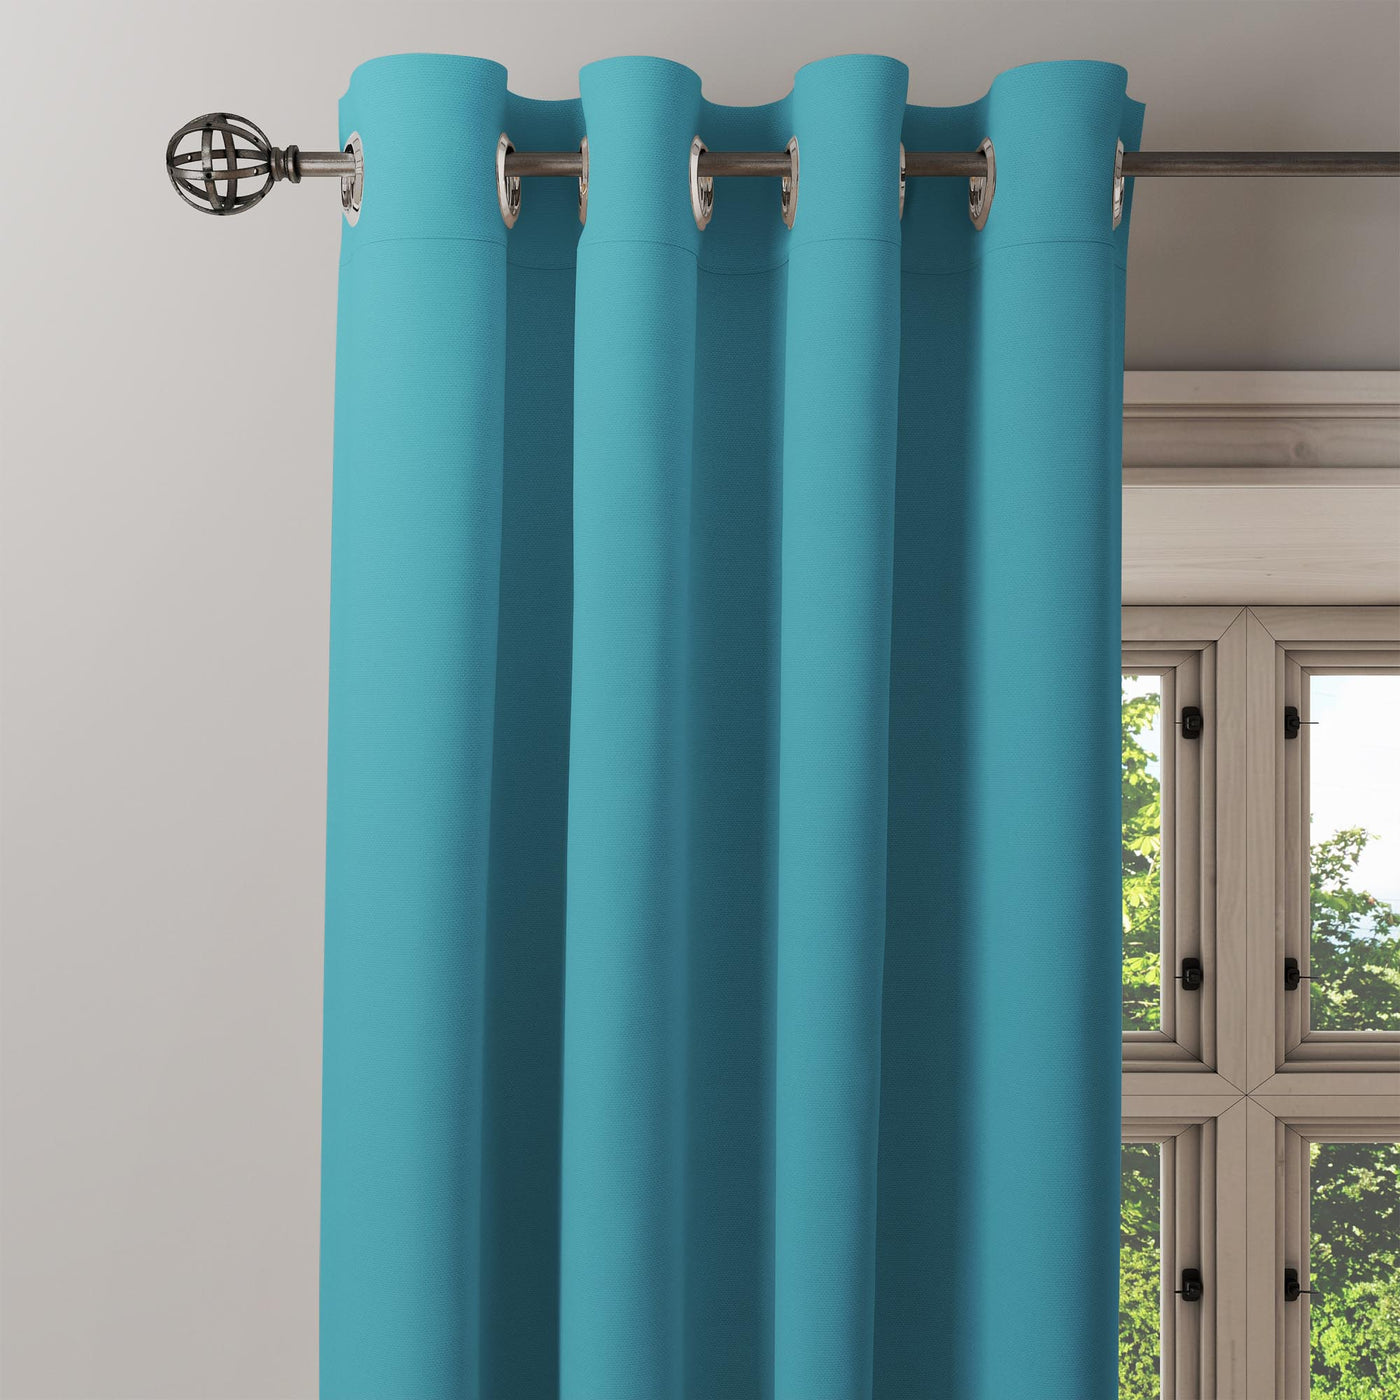 Turquoise curtain